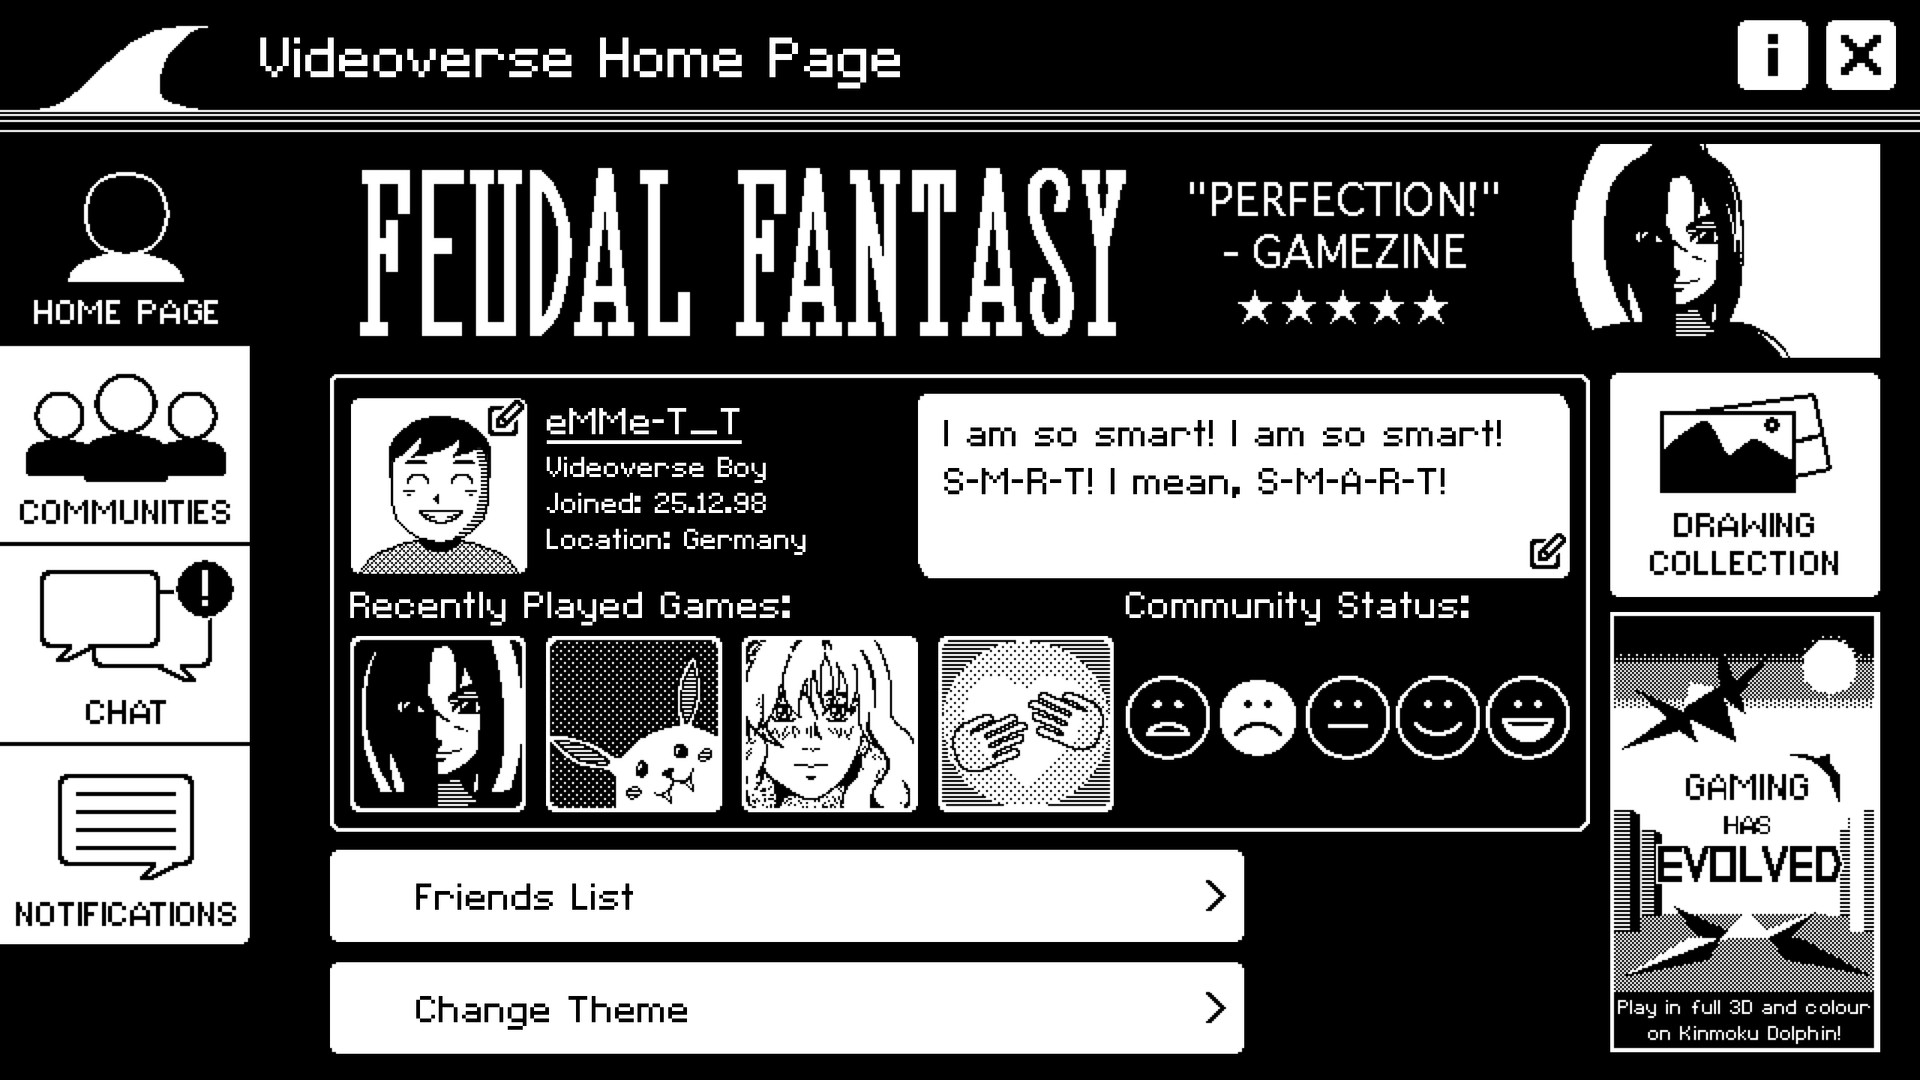 A page for a fictional game called Feudal Fantasy appears in Videoverse.